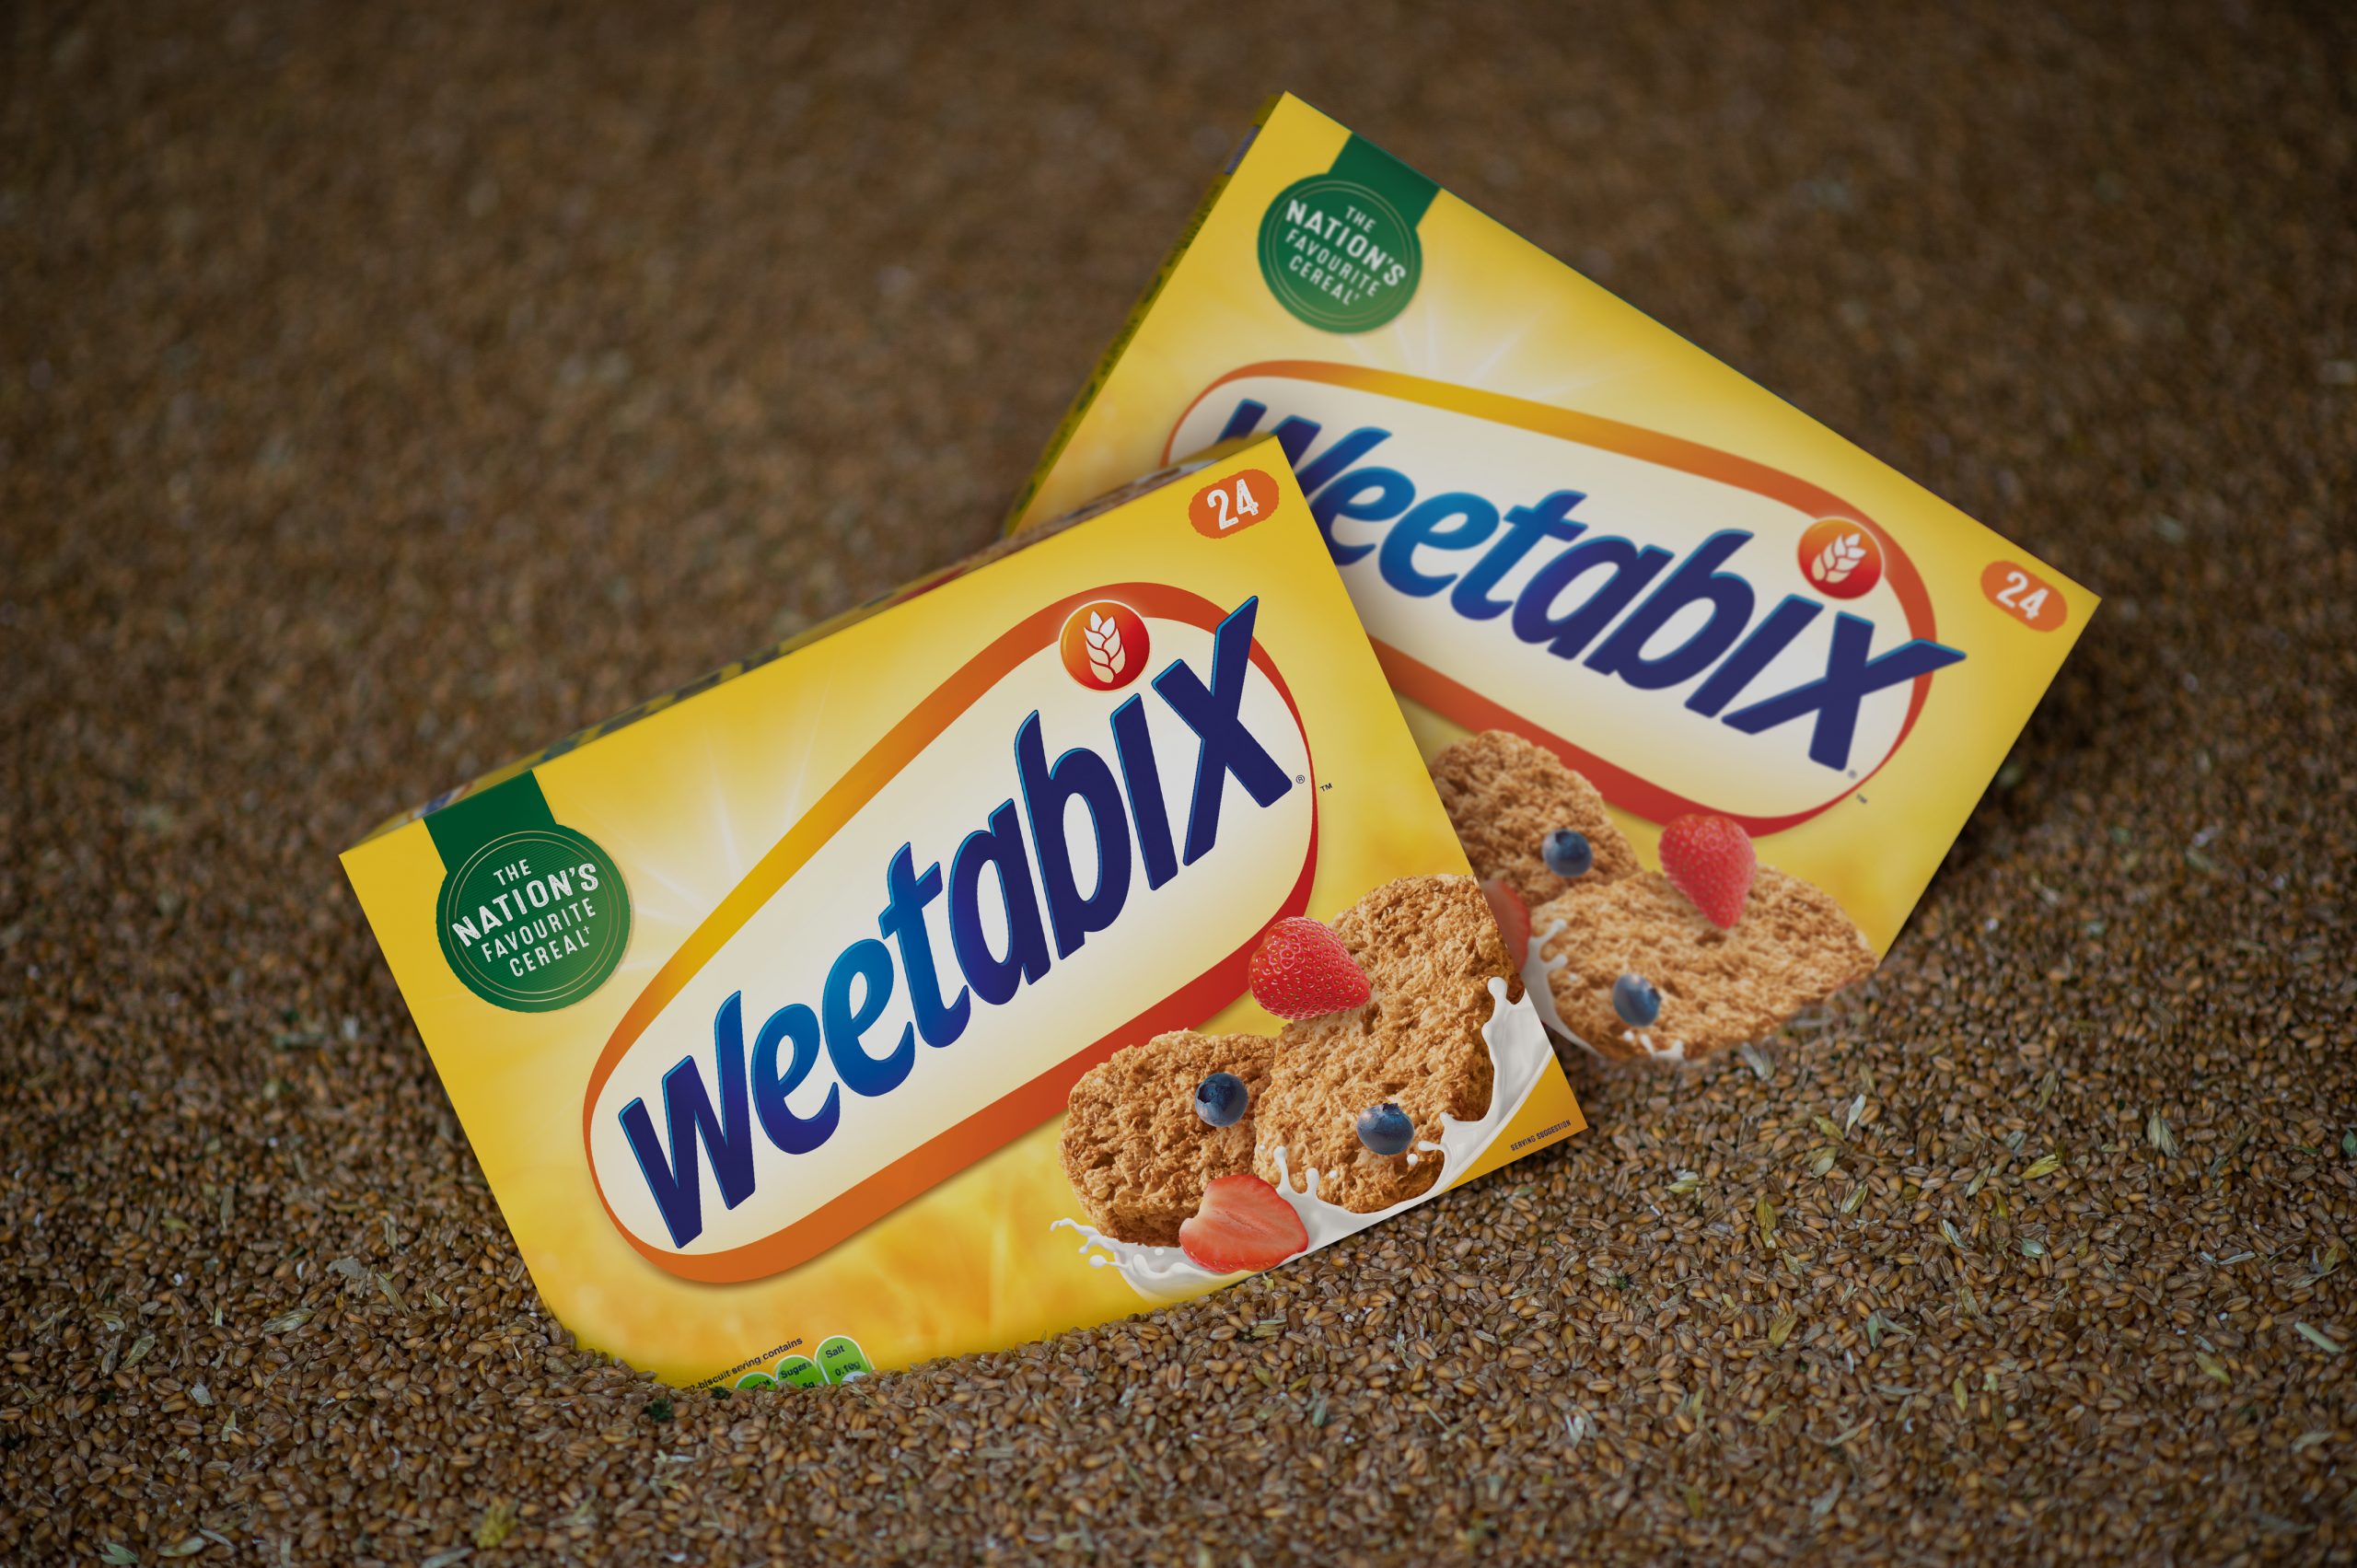 All Weetabix Food Company packs now fully recyclable